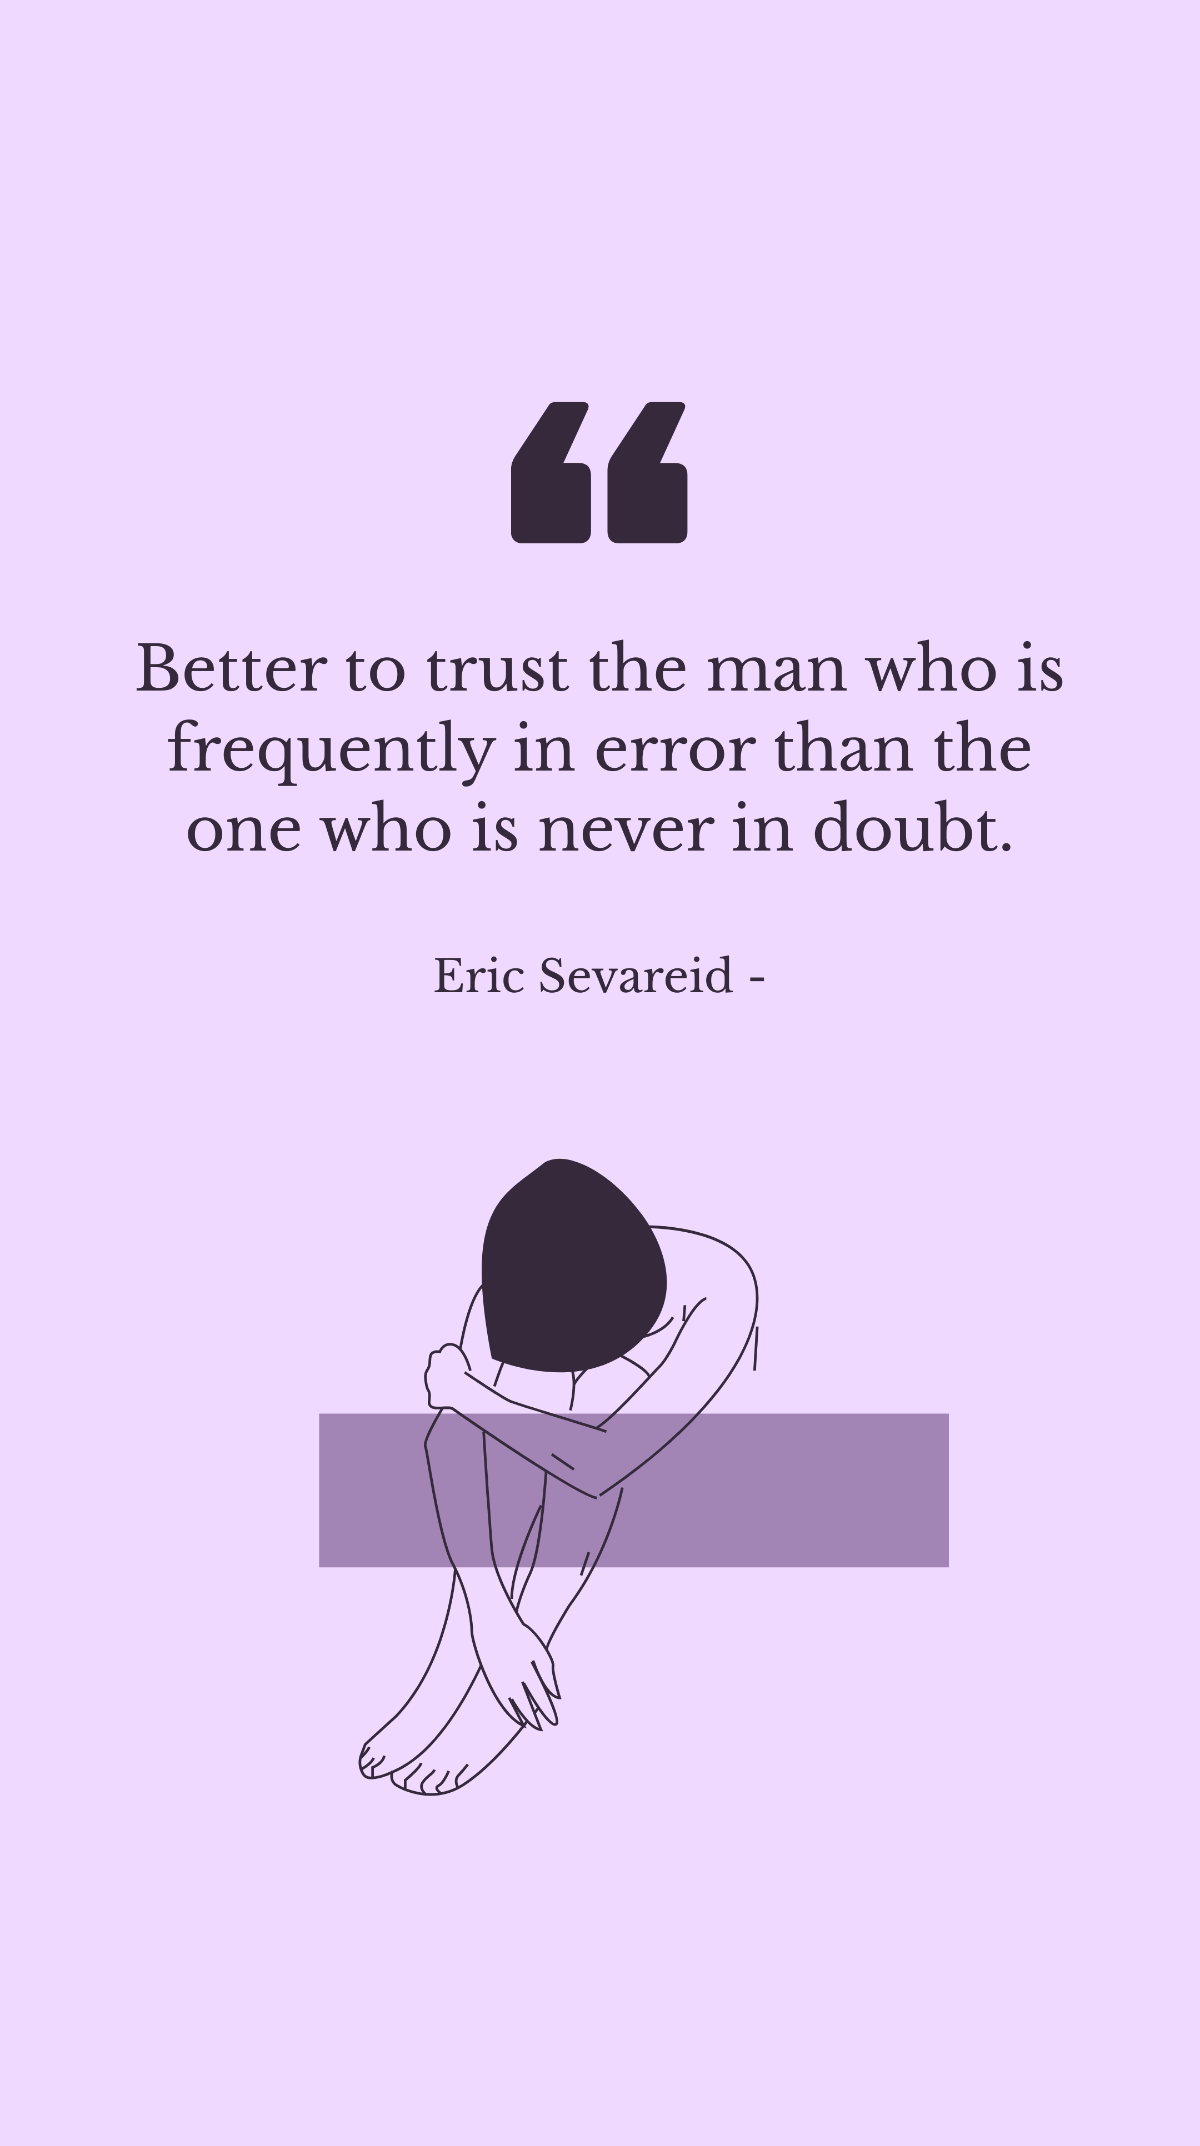 Eric Sevareid - Better to trust the man who is frequently in error than the one who is never in doubt.